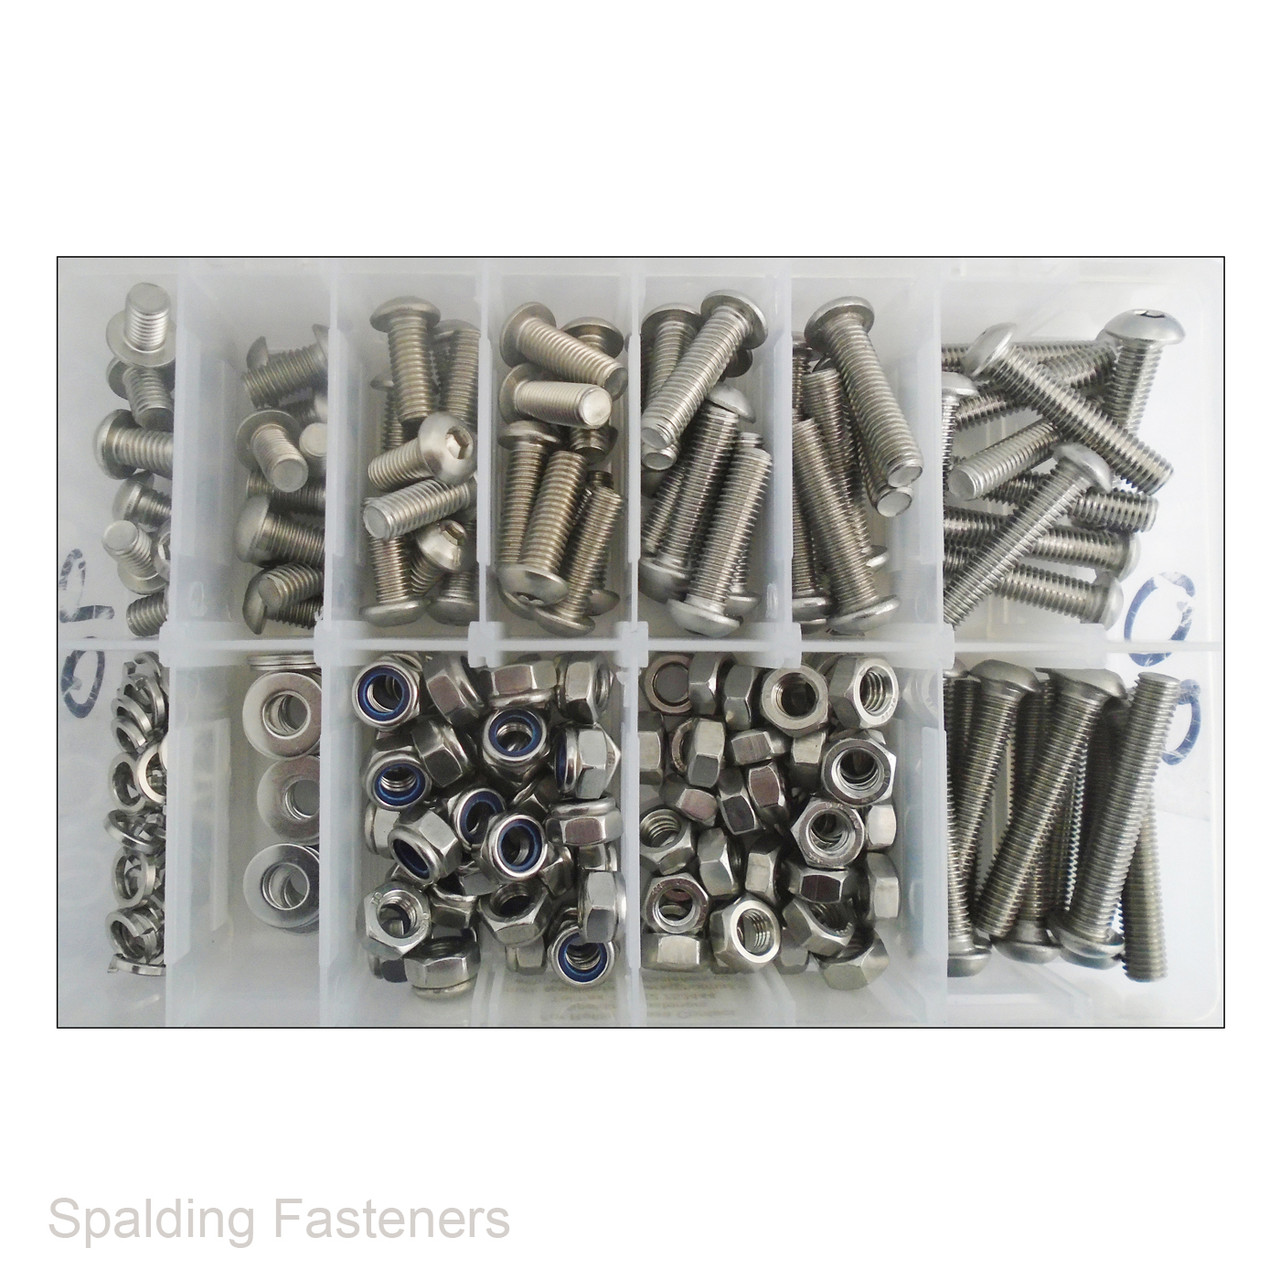 Assorted M8 Socket Button Screws With Nuts & Washers